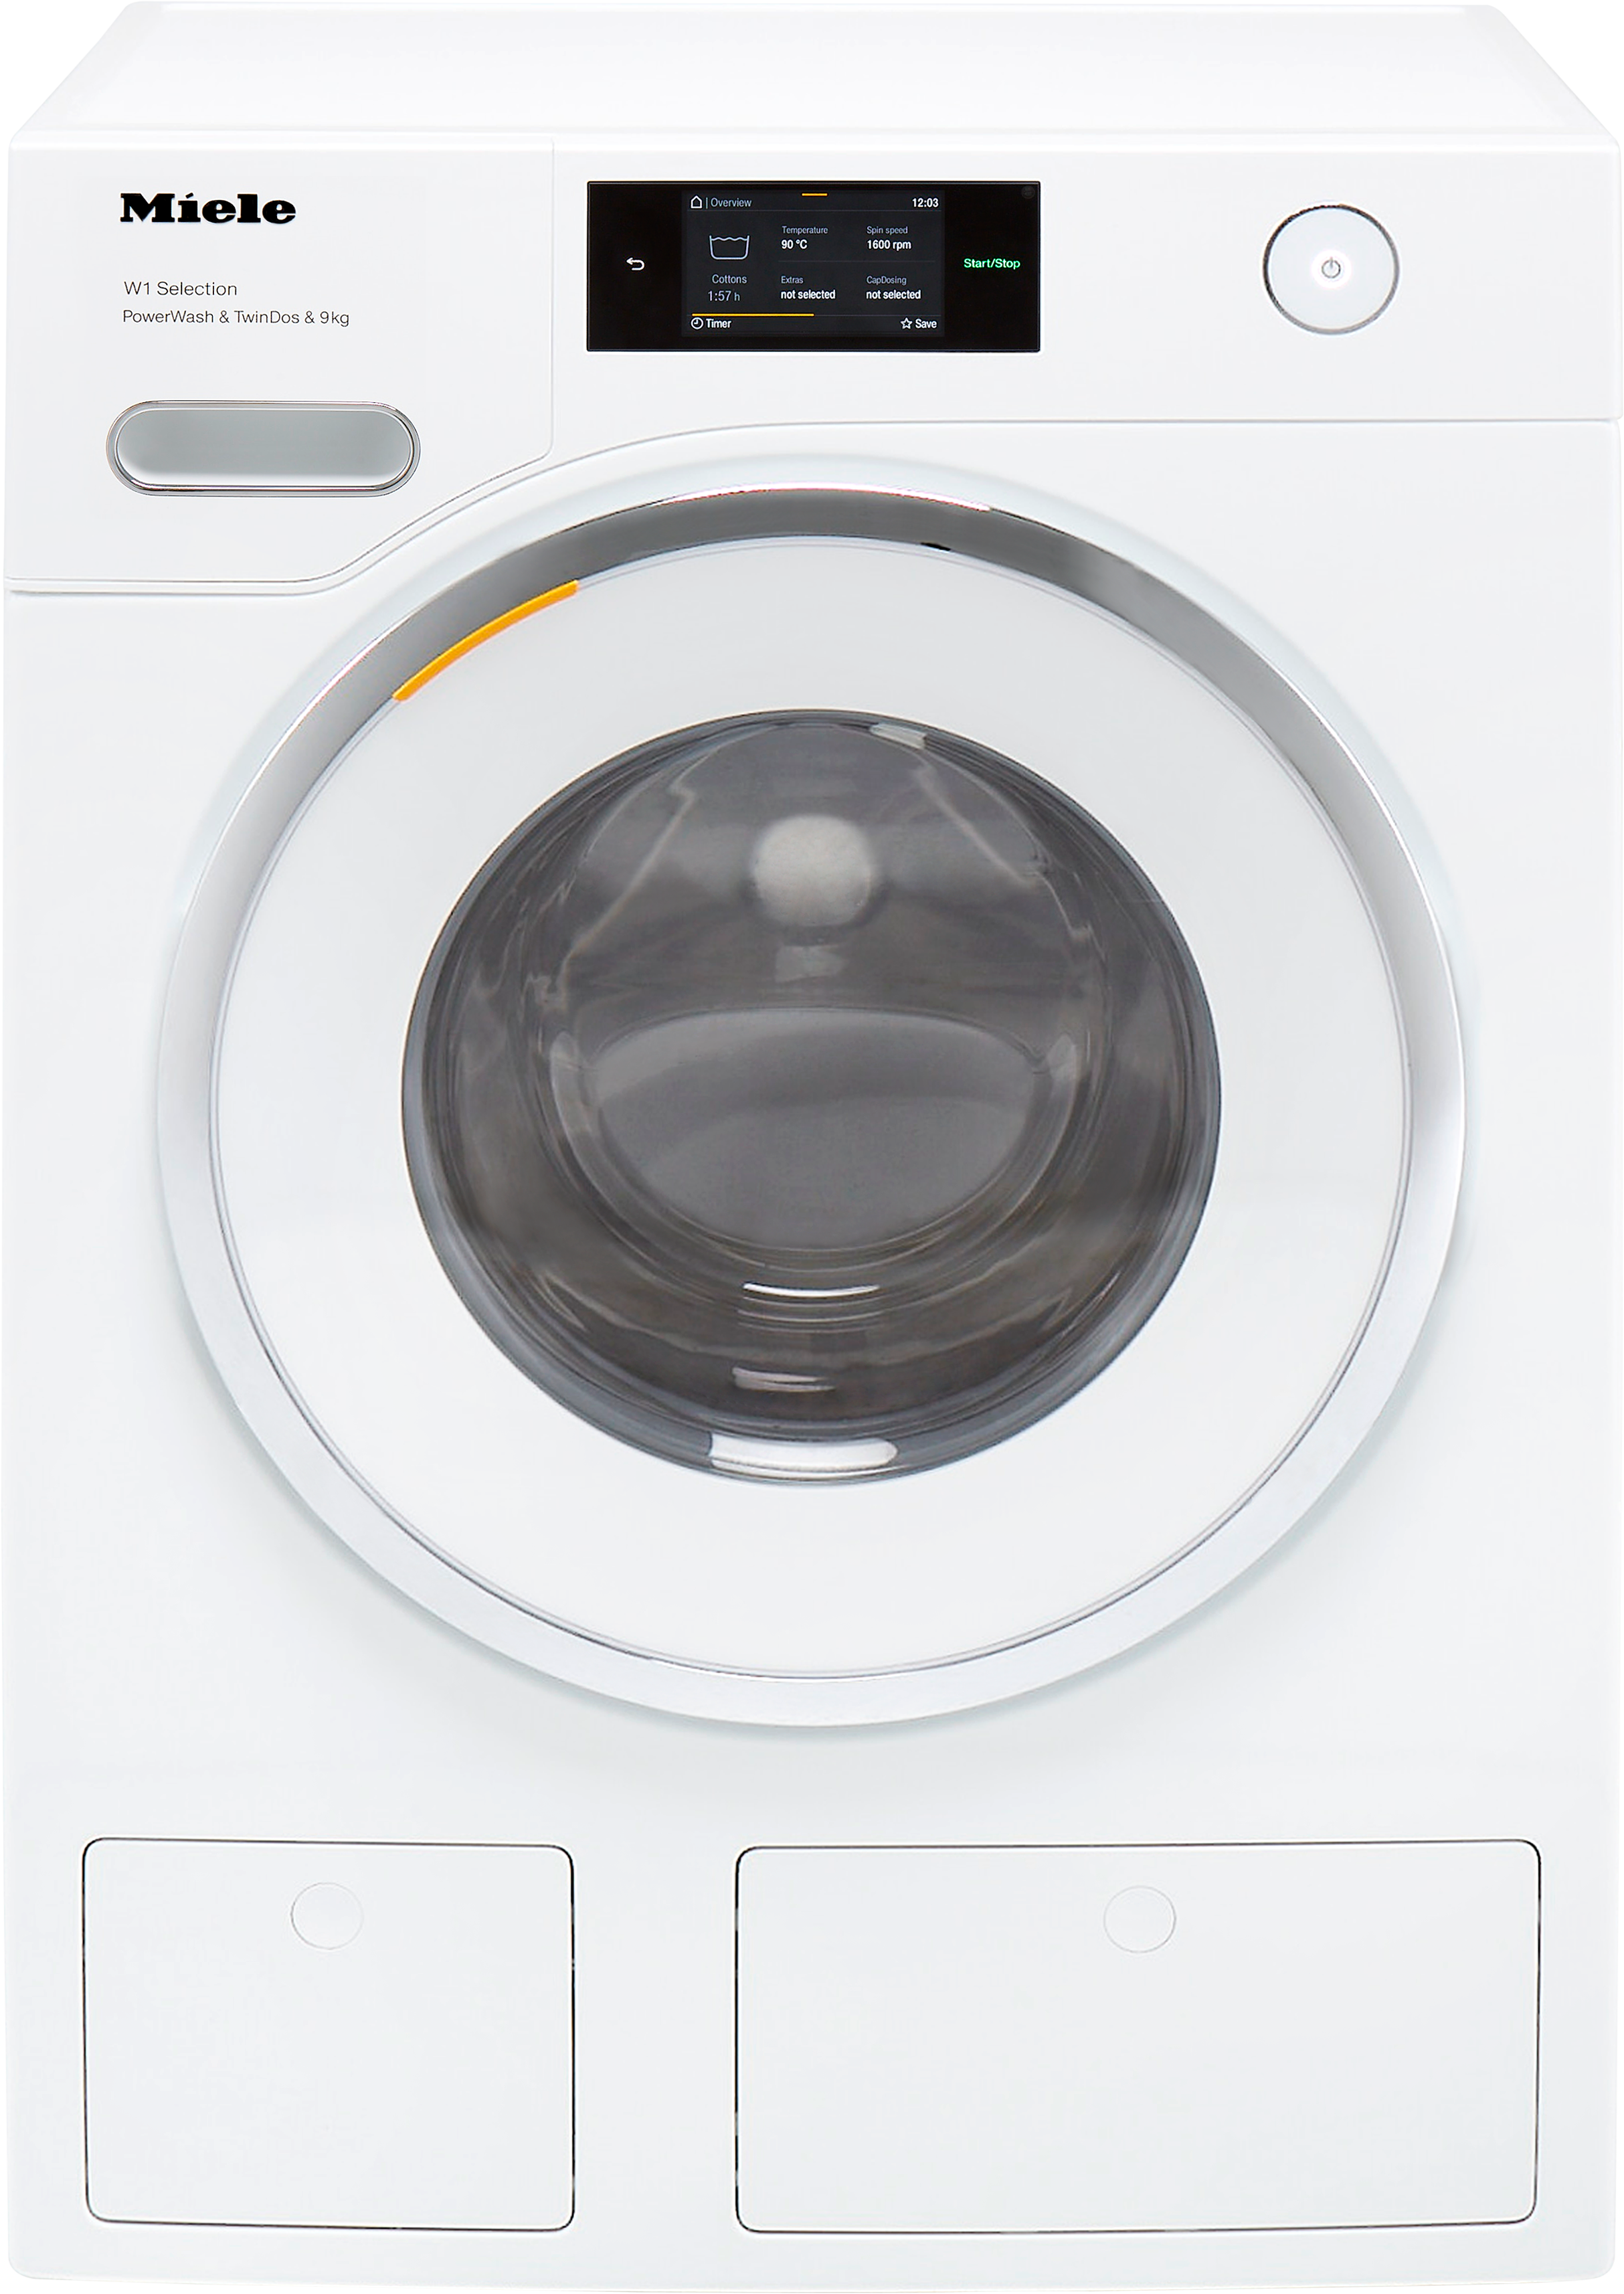 Miele W1 WSR863WPS 9kg Washing Machine with 1600 rpm - White - A Rated White